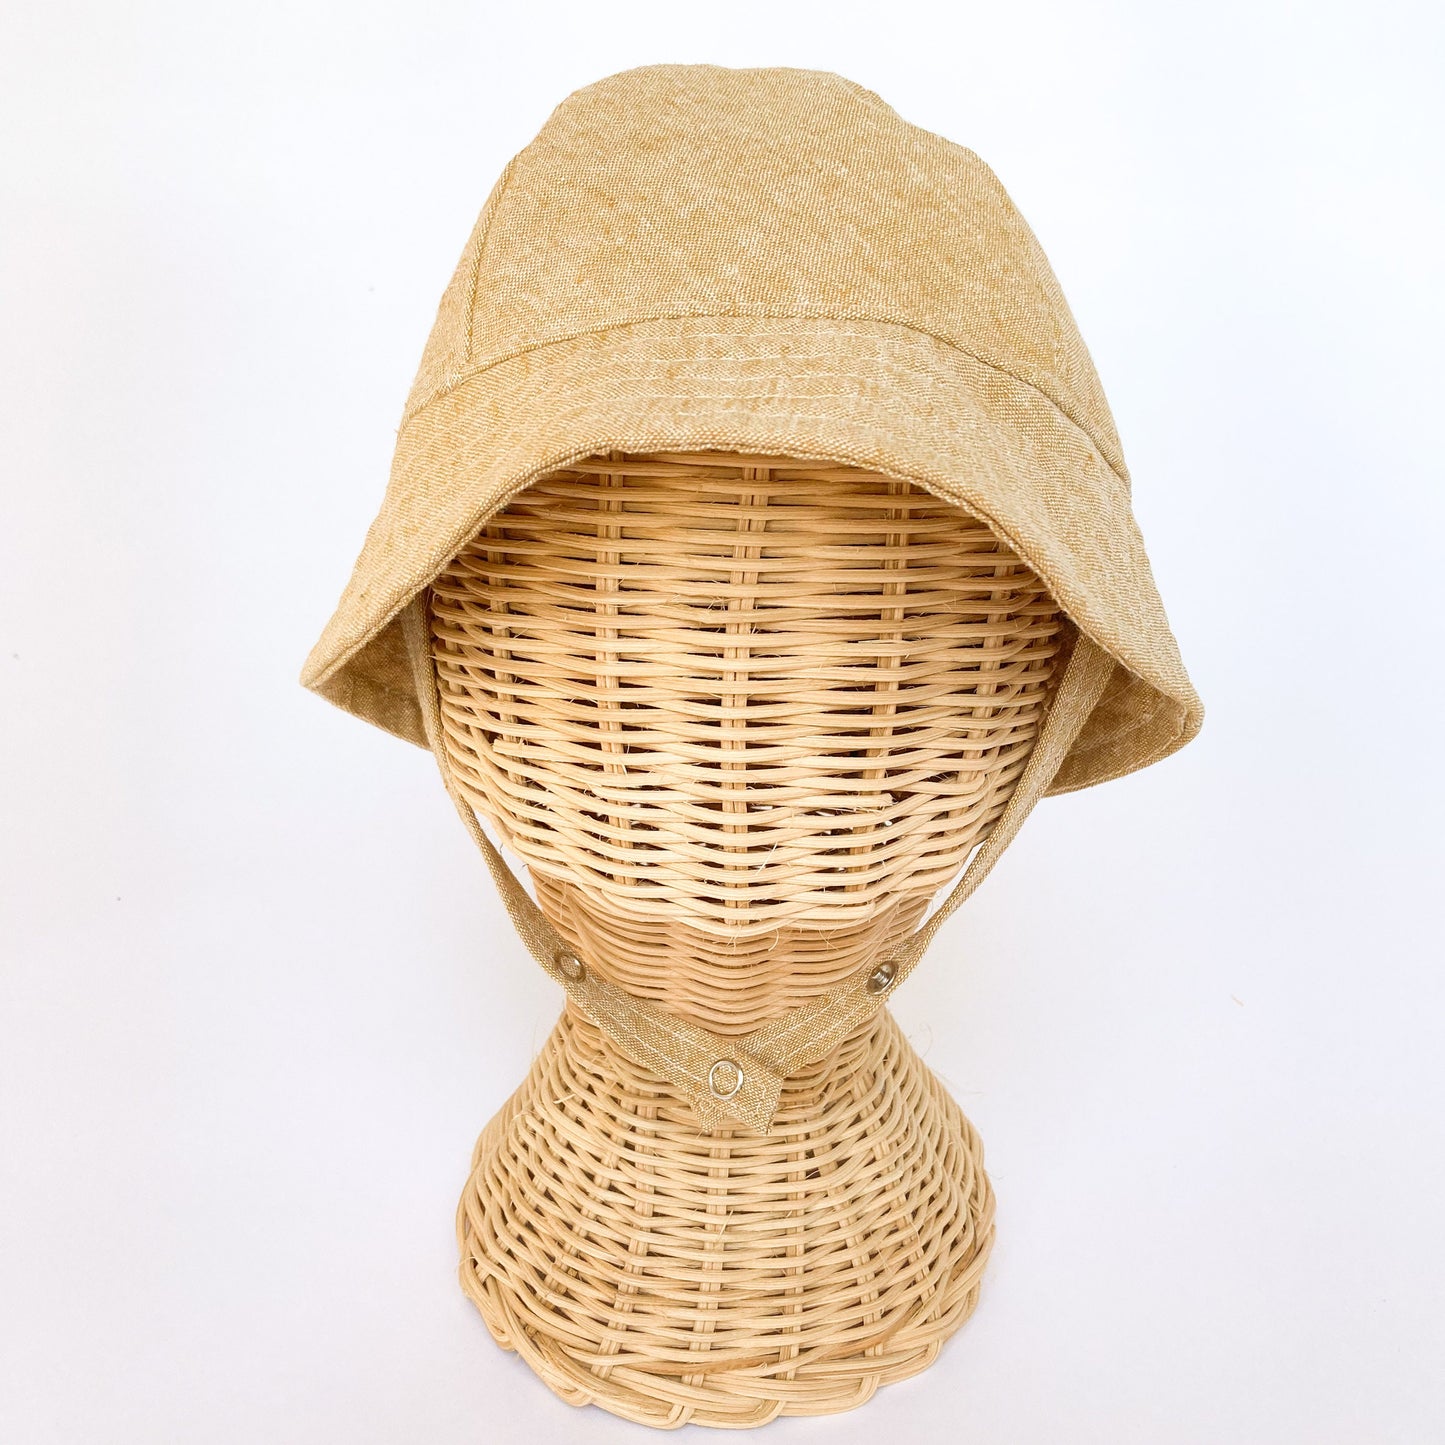 Brimmed Sun Hat, Outdoor Baby Hat, Kids Summer Hat, Tan Bucket Hat, Sun Hat for Toddlers, Natural Sun Hat, Bucket Hat for Kids